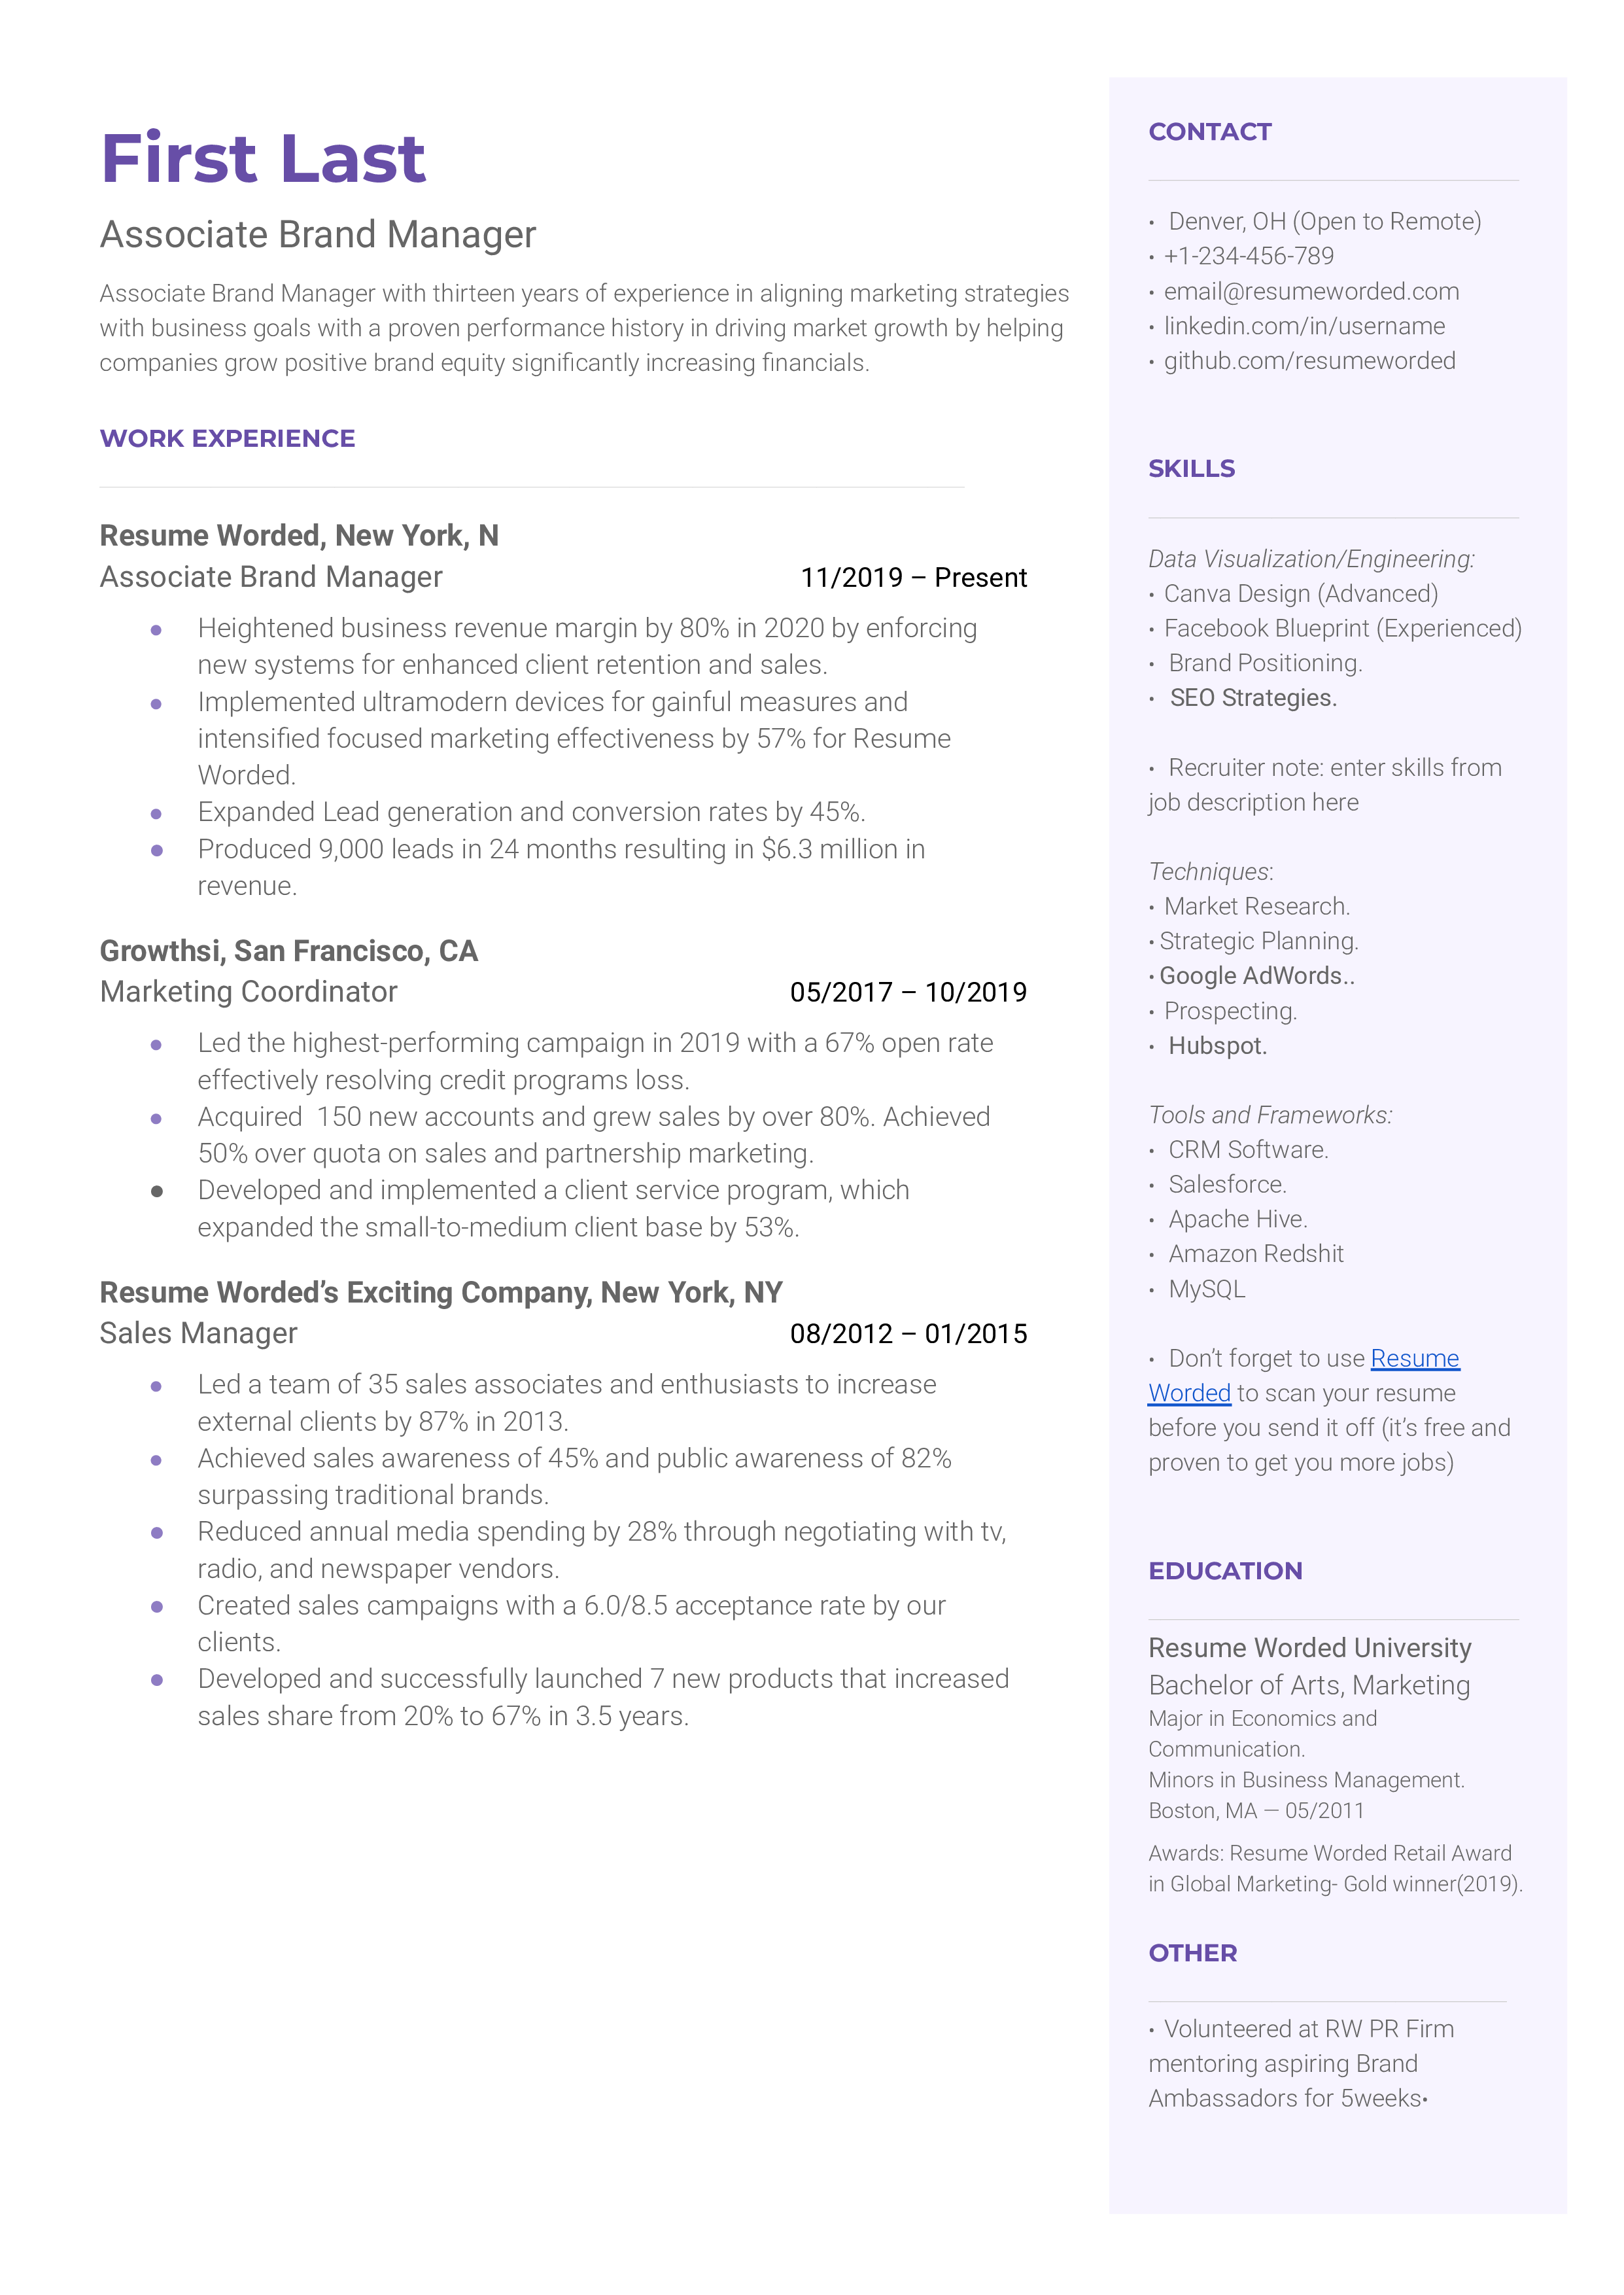 An associate brand manager resume sample that highlights the applicant’s industry recognition and quantifiable success.